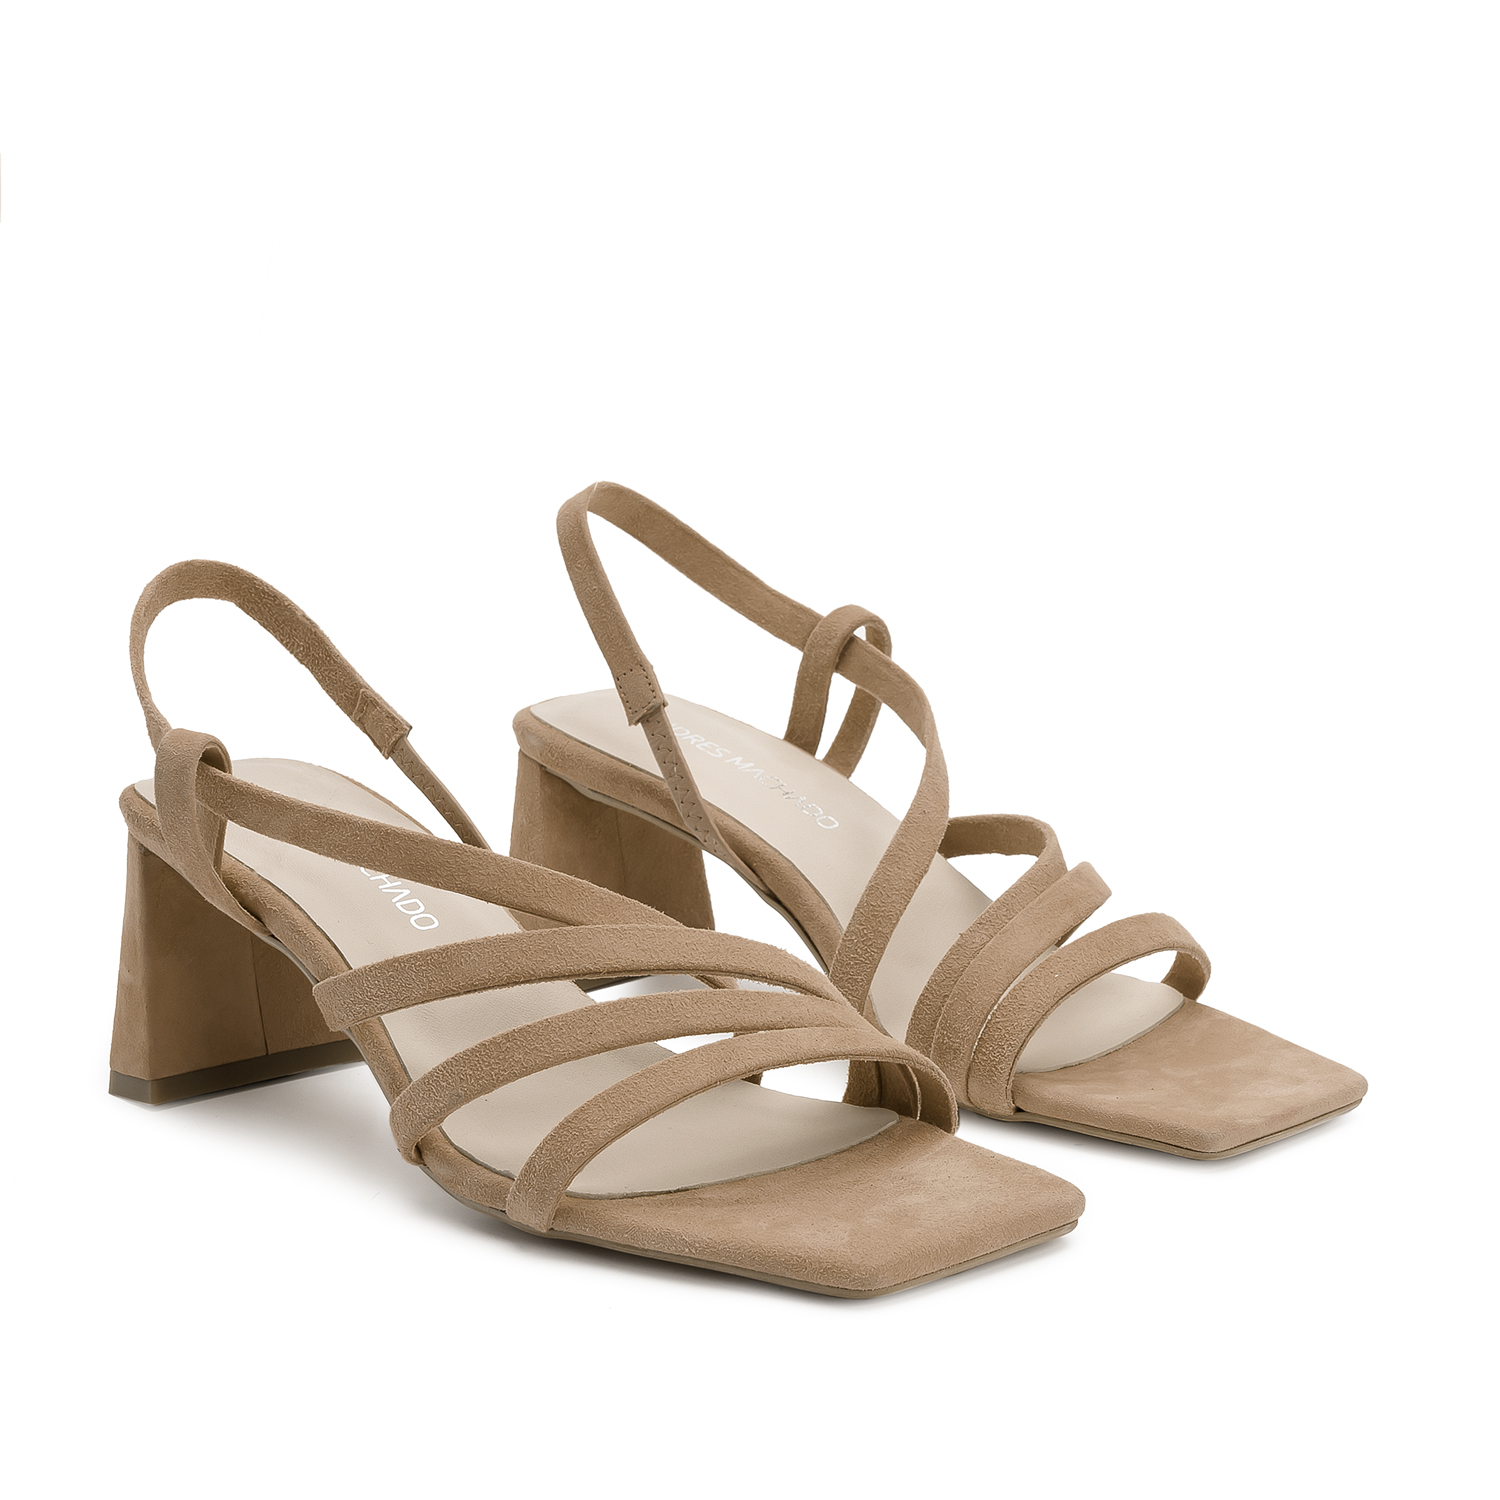 Strapped Sandals in Camel Split Leather and Square Toe 